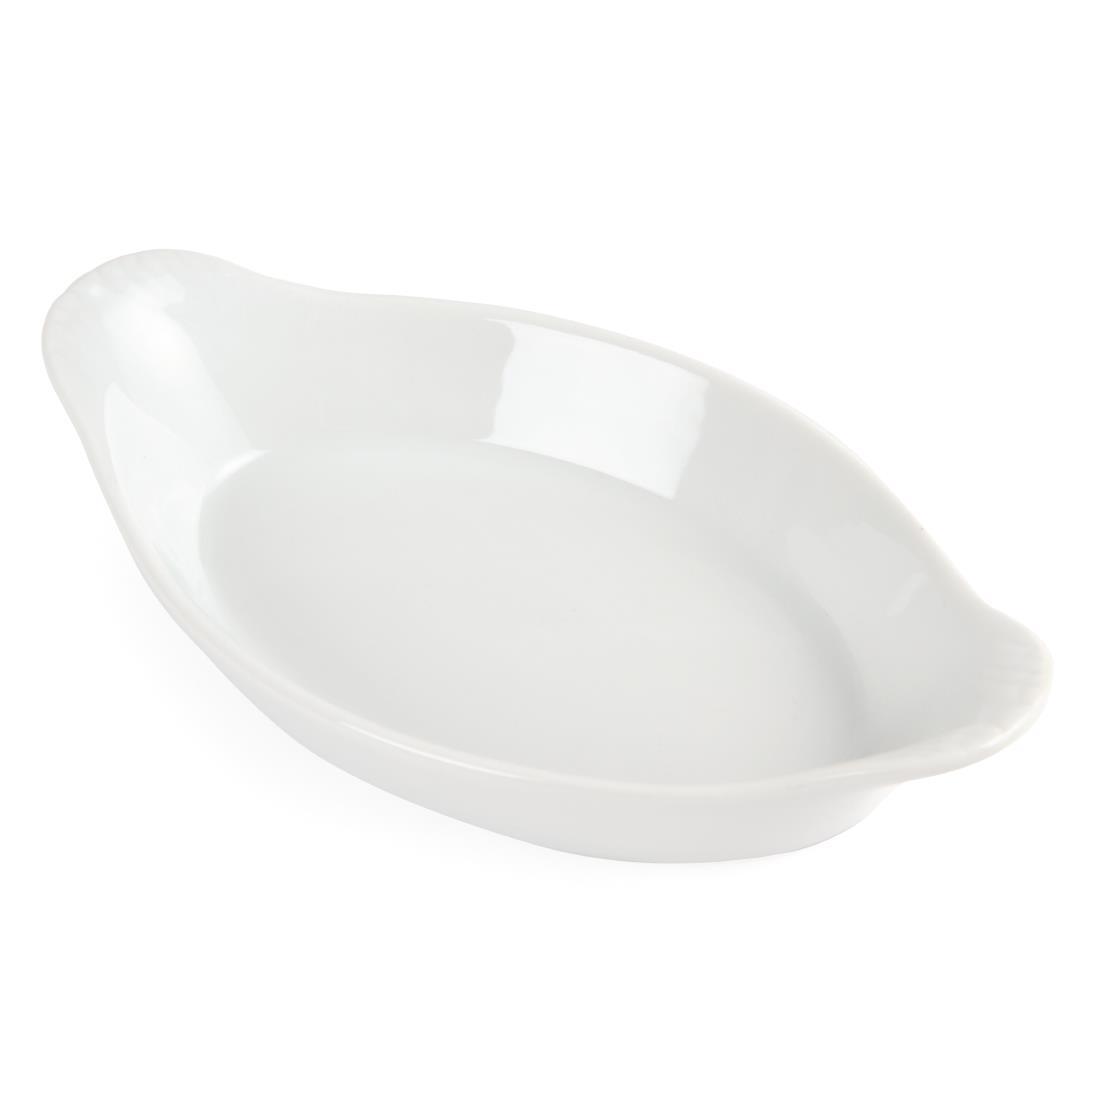 Olympia Whiteware Oval Eared Dishes 204mm (Pack of 6) - W441  - 4